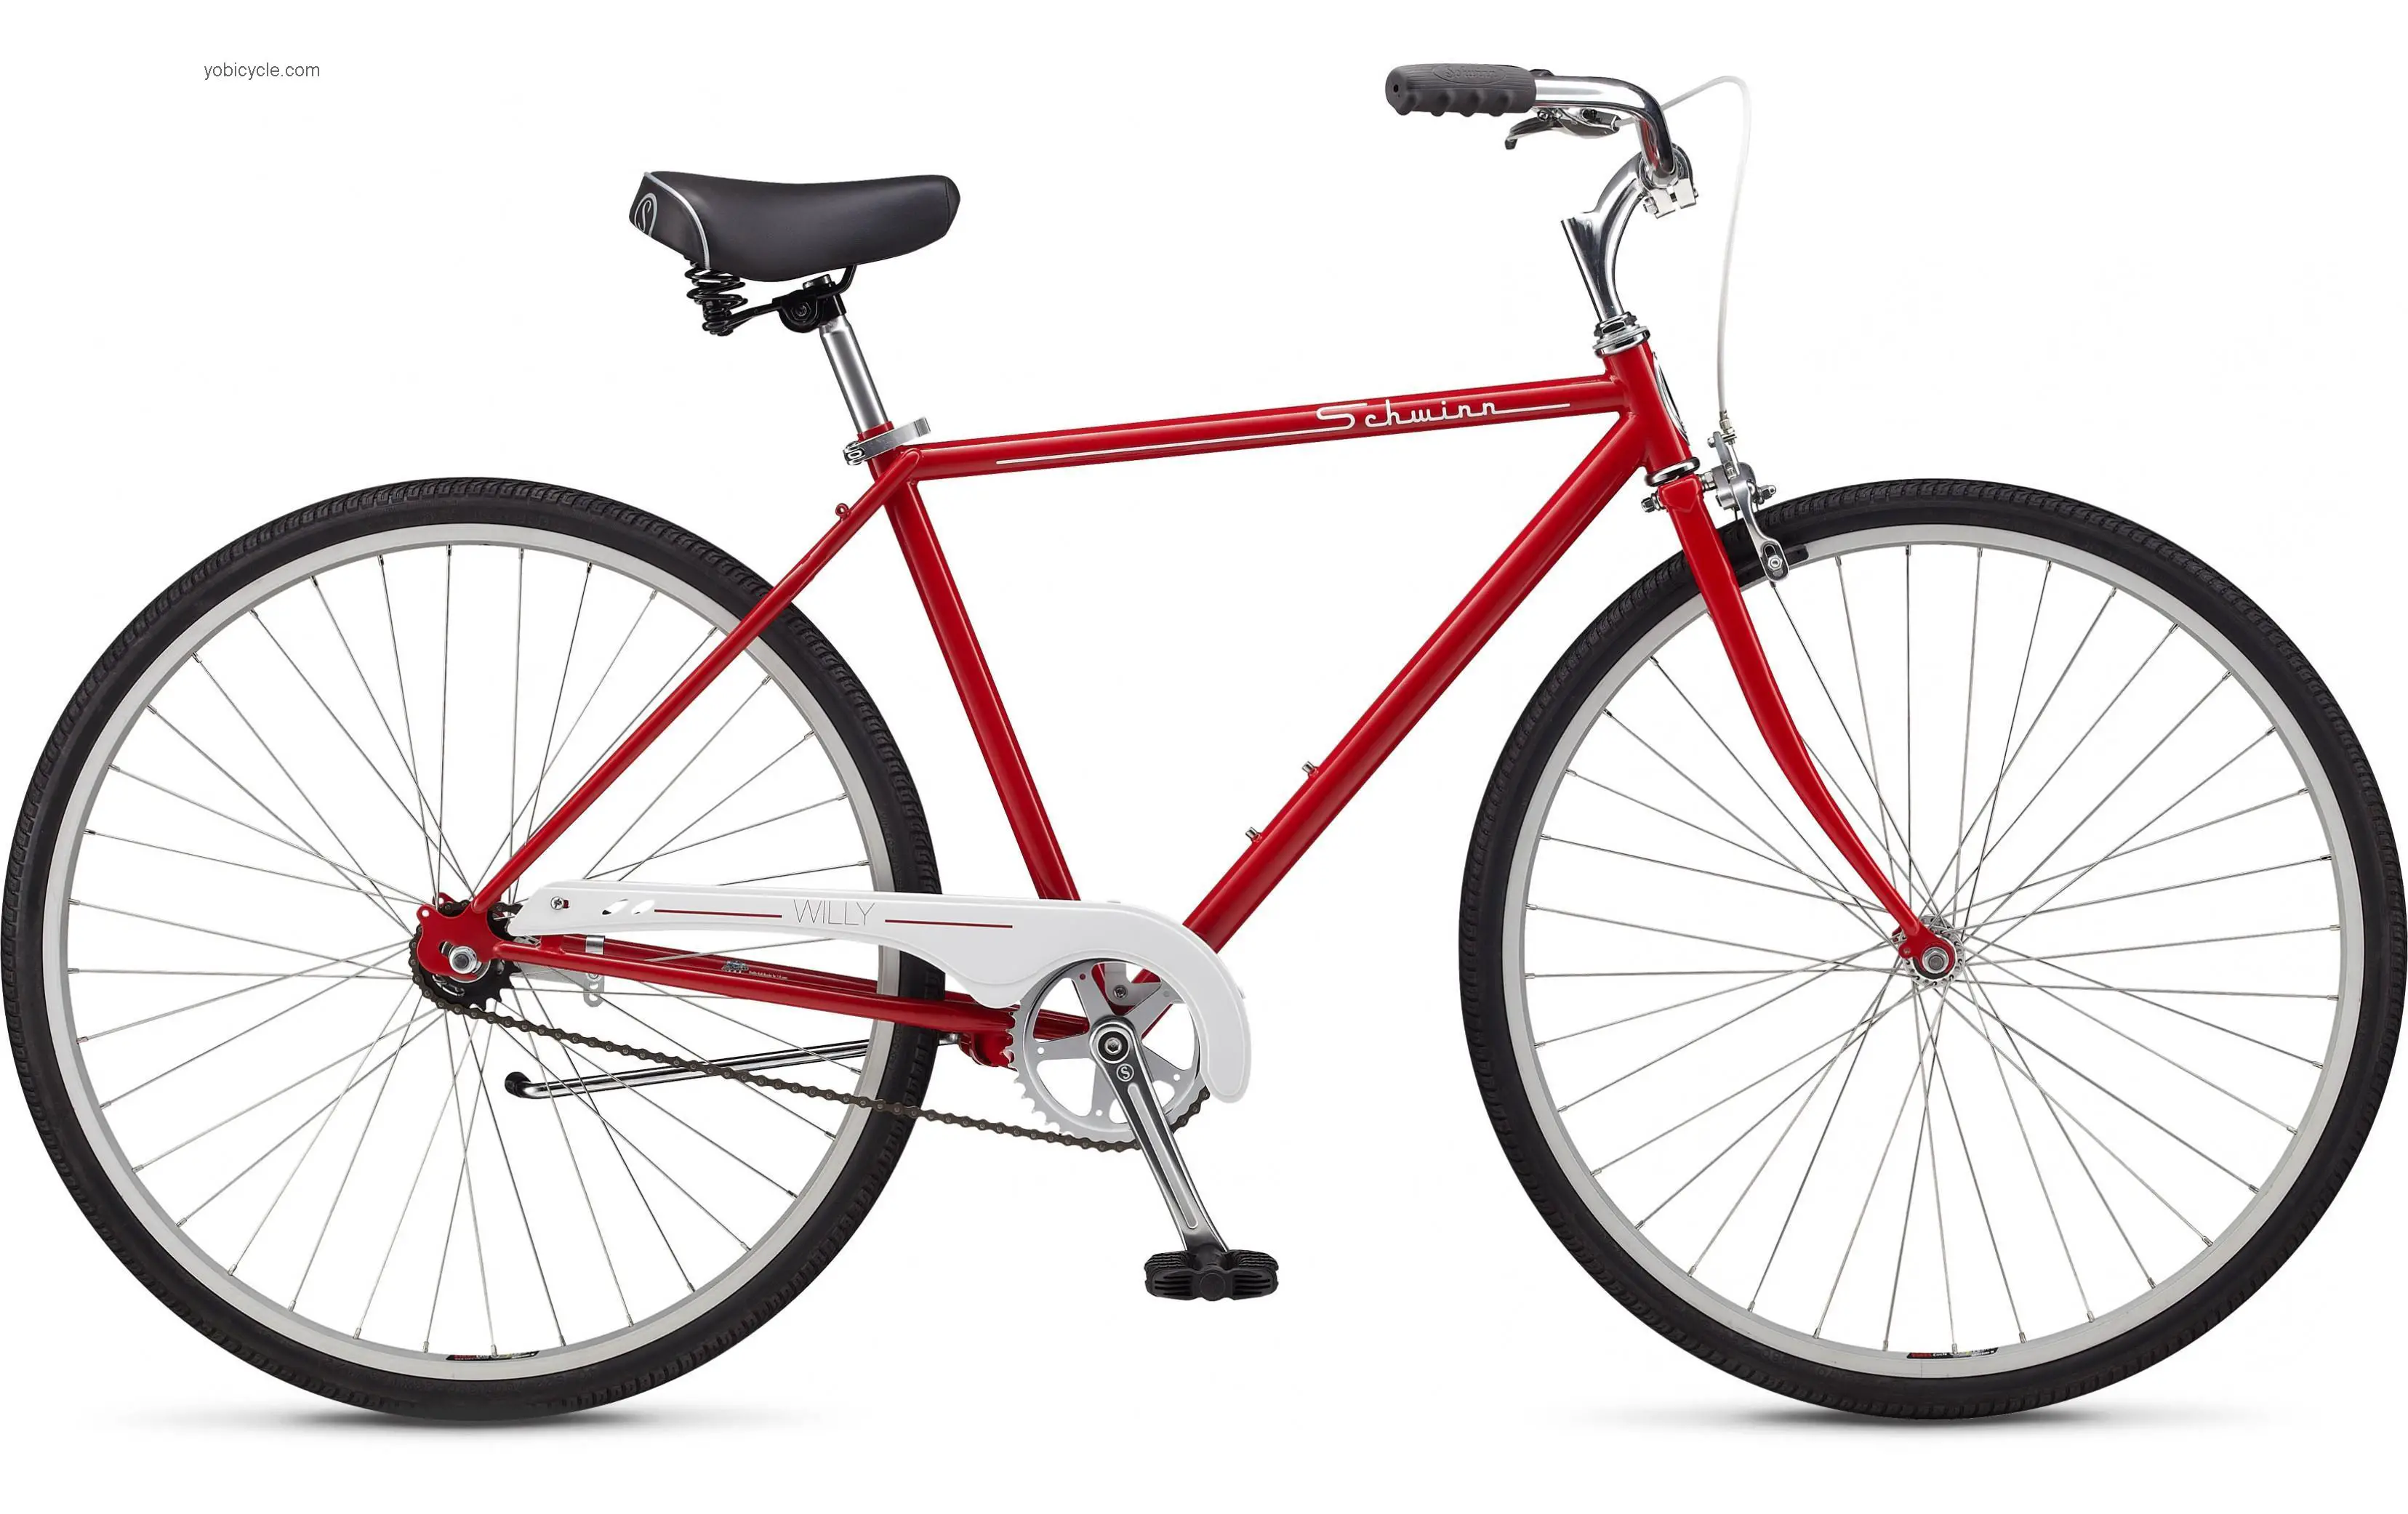 Schwinn Willy 1 Speed competitors and comparison tool online specs and performance